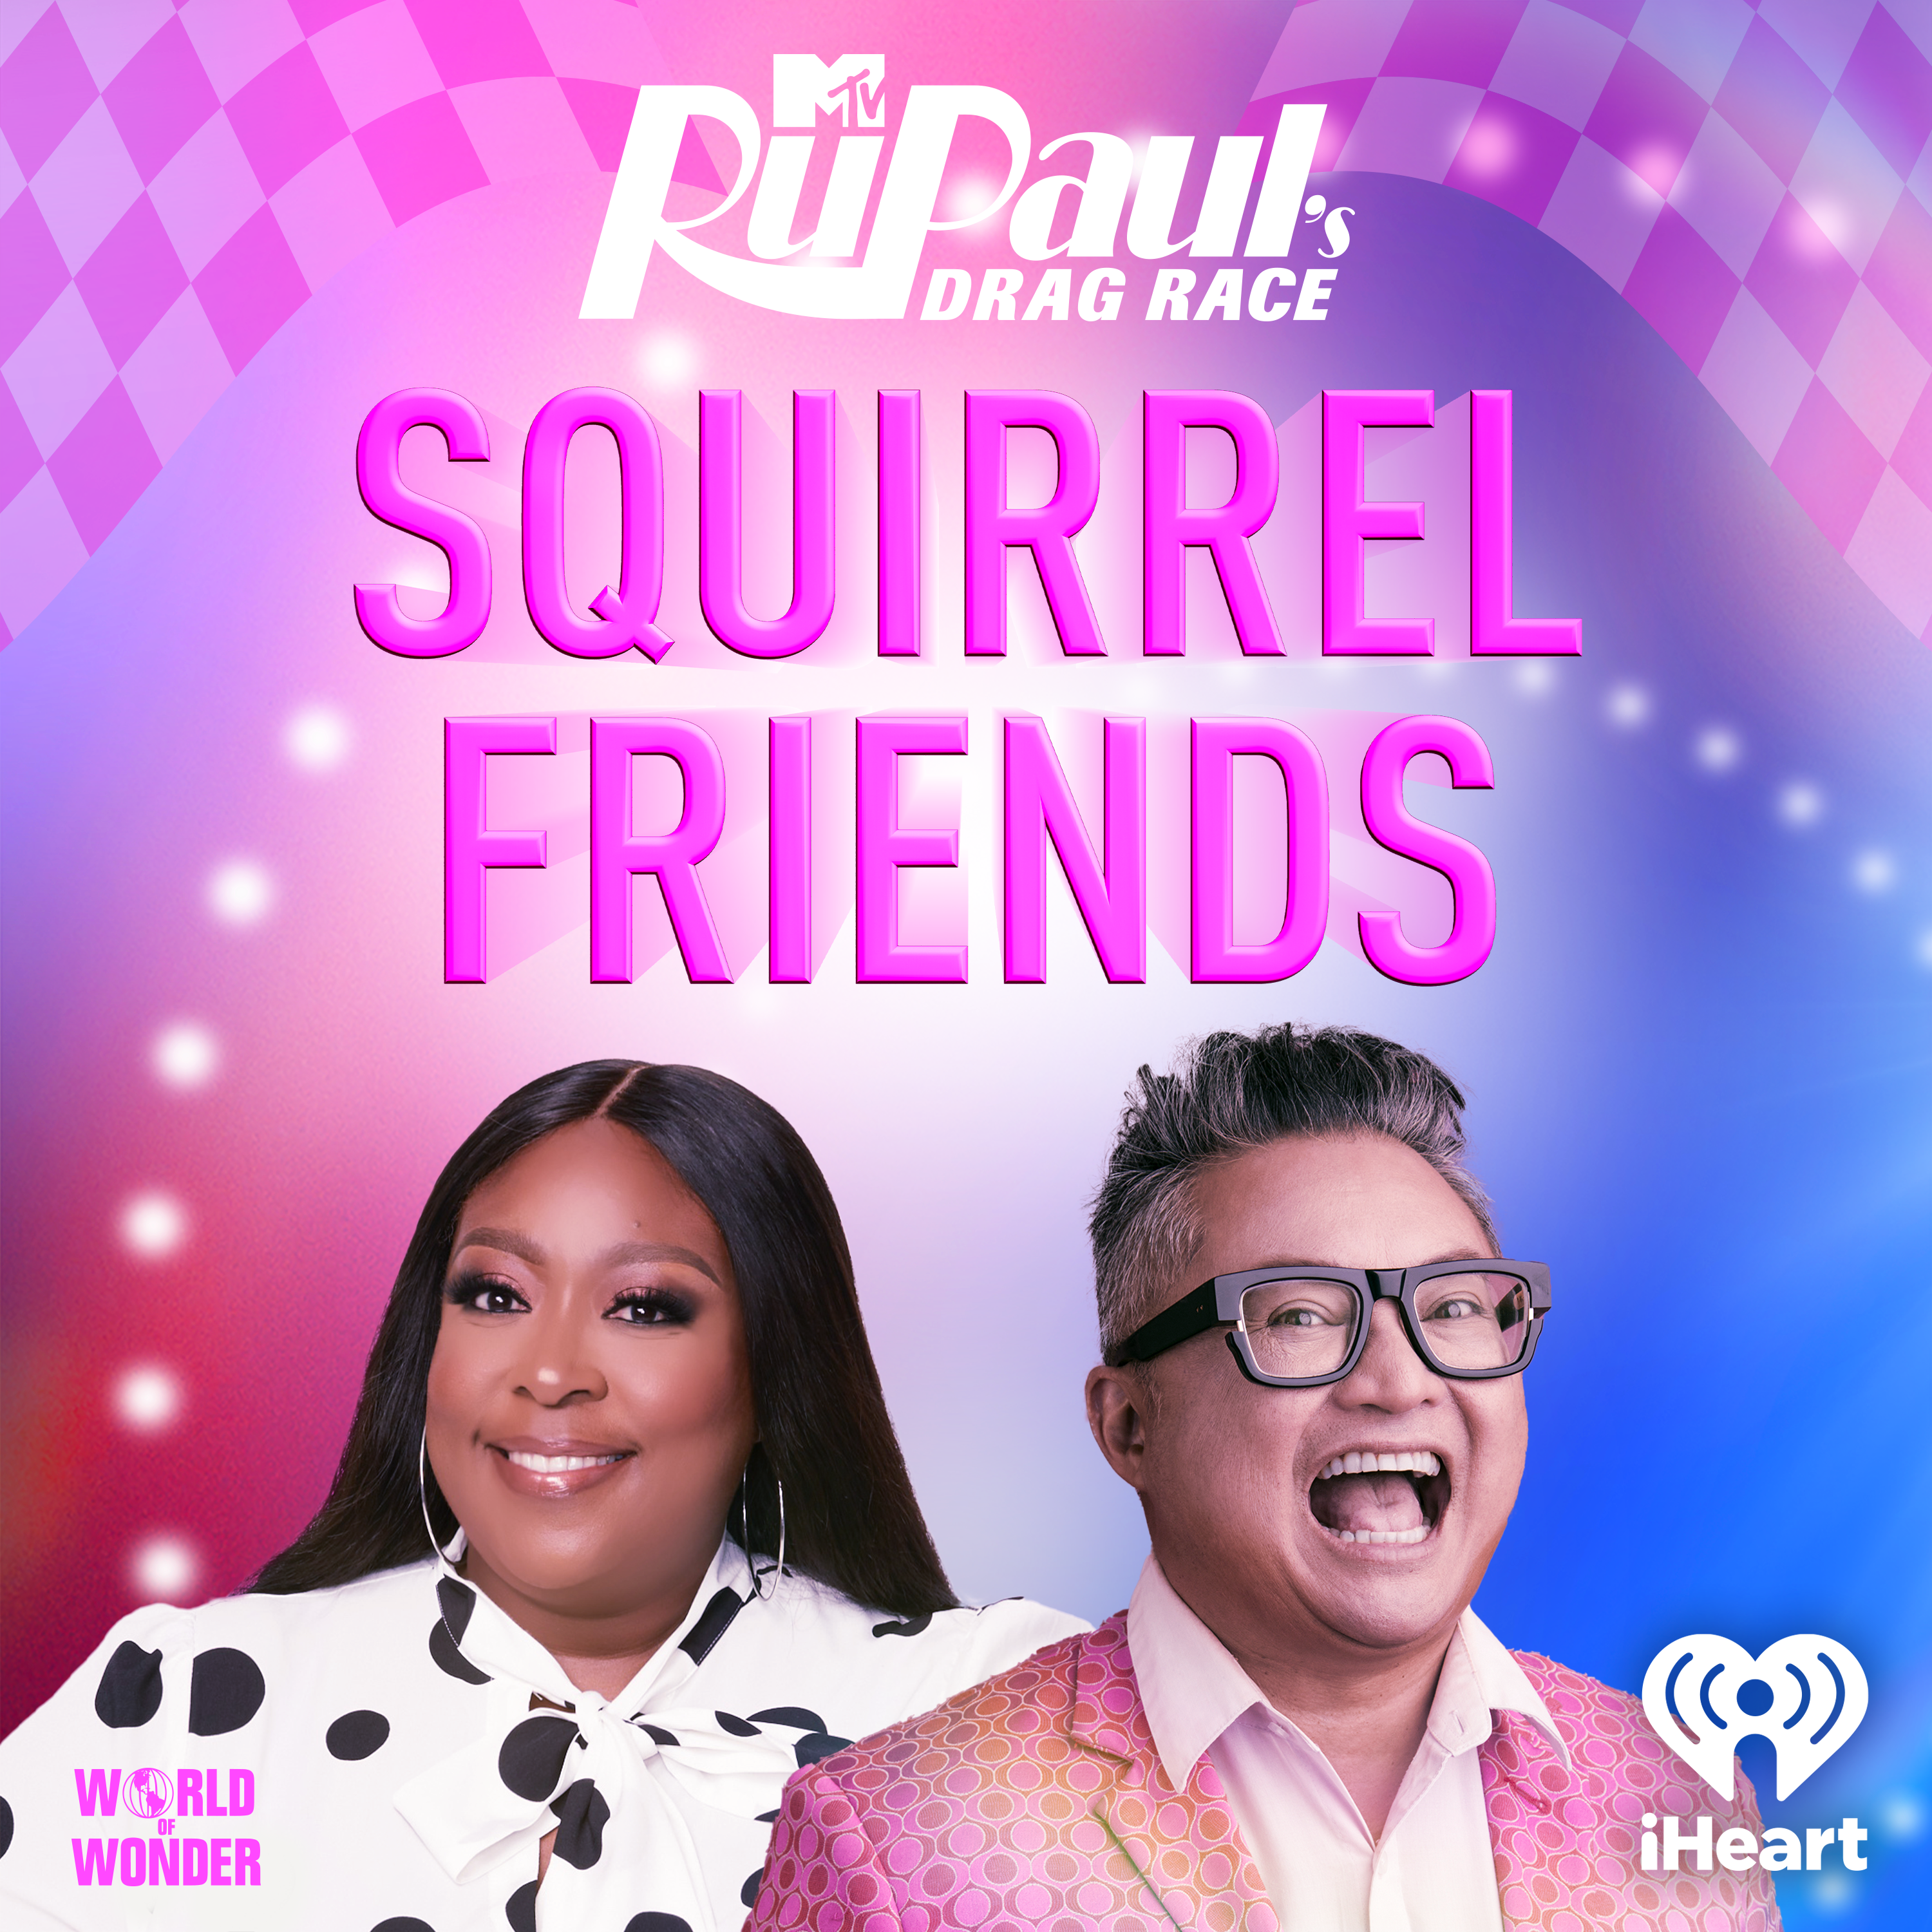 All Killer, No Filler with Alec Mapa and Loni Love